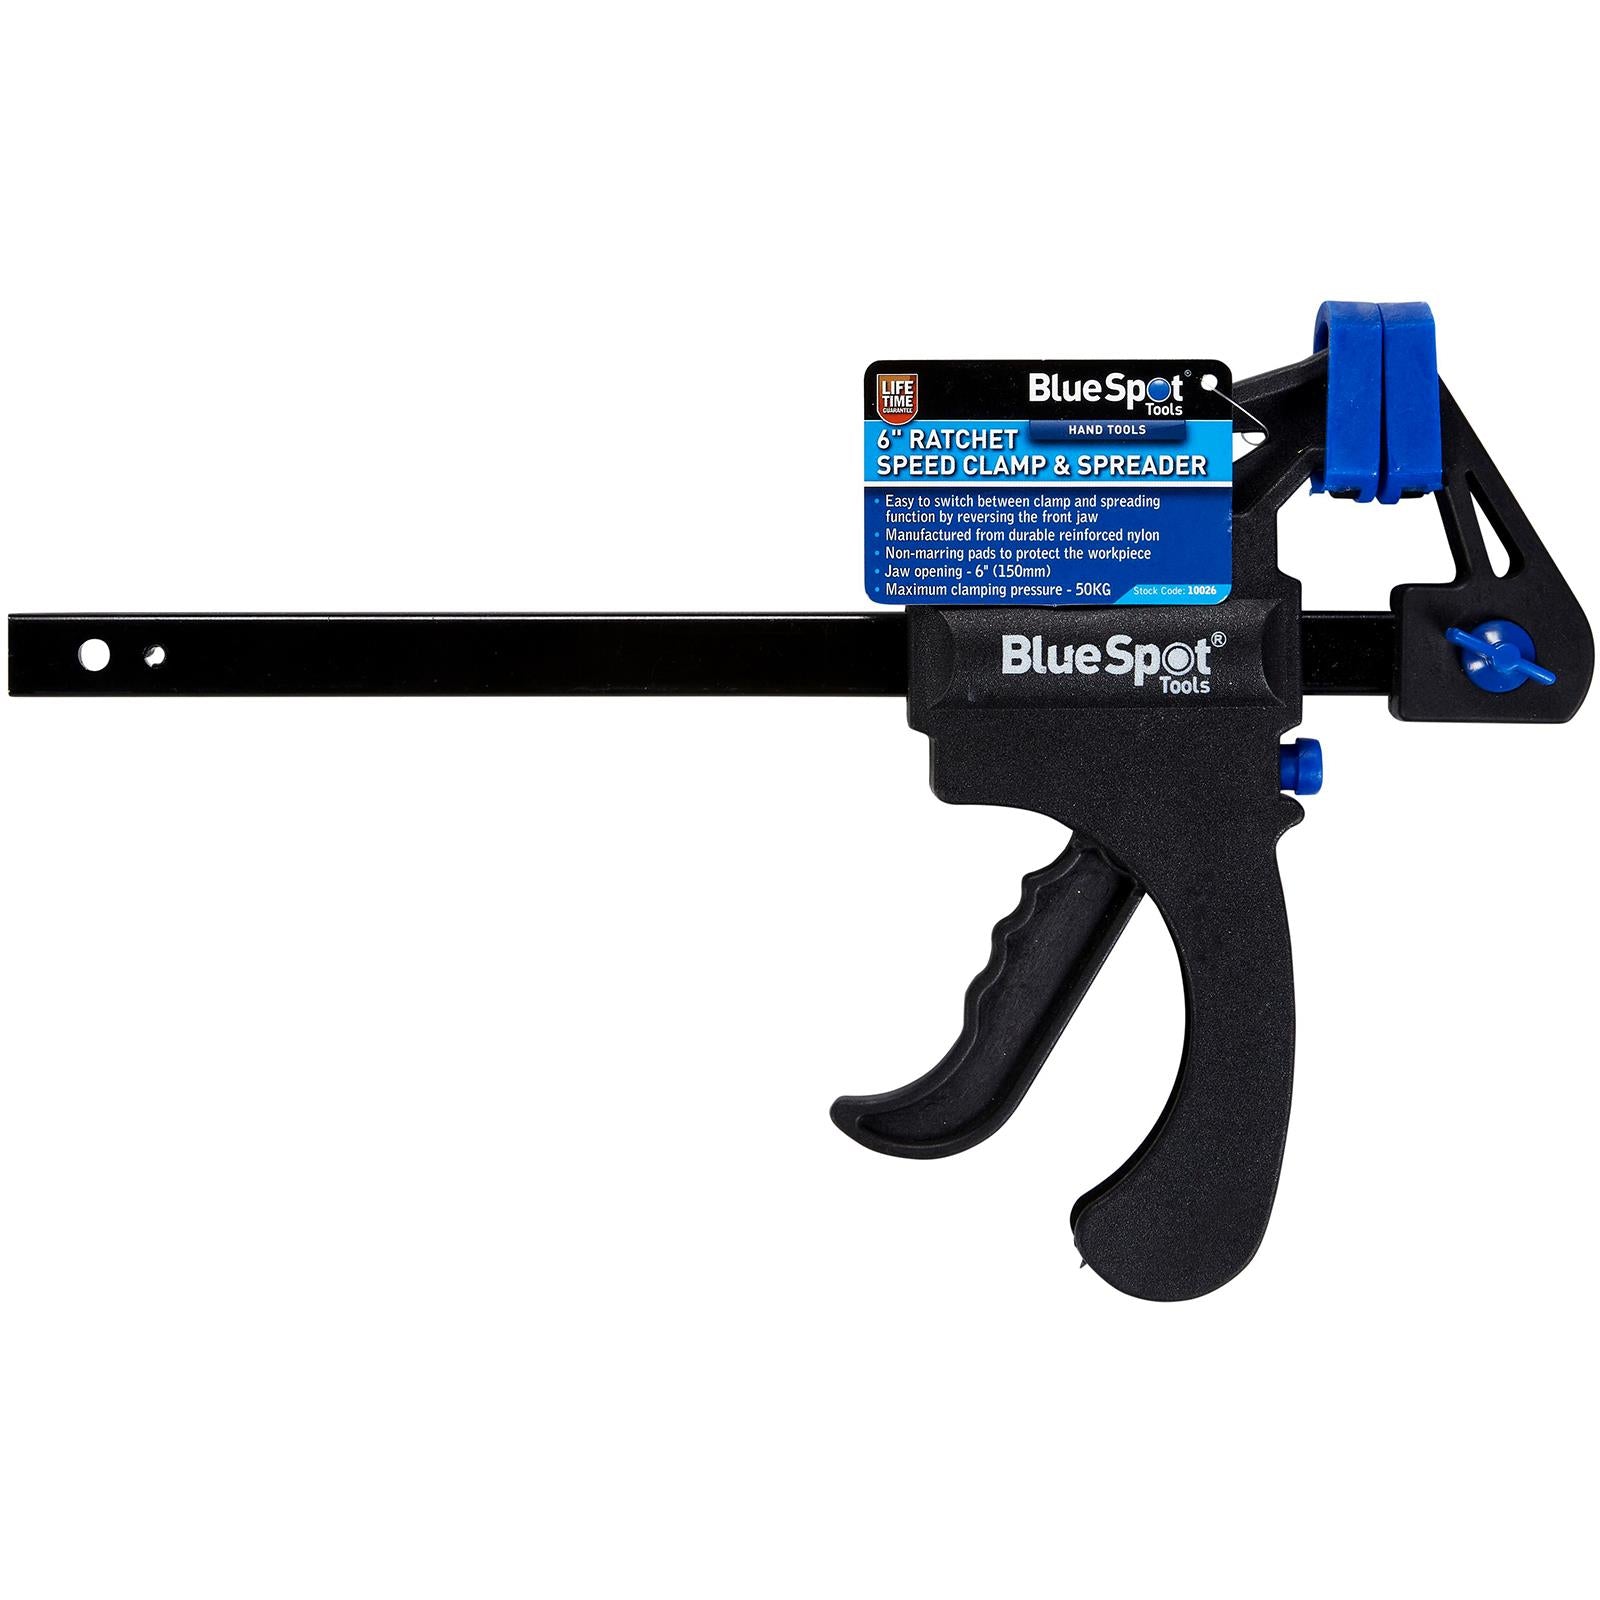 BlueSpot 6" Ratchet Speed Clamp and Spreader